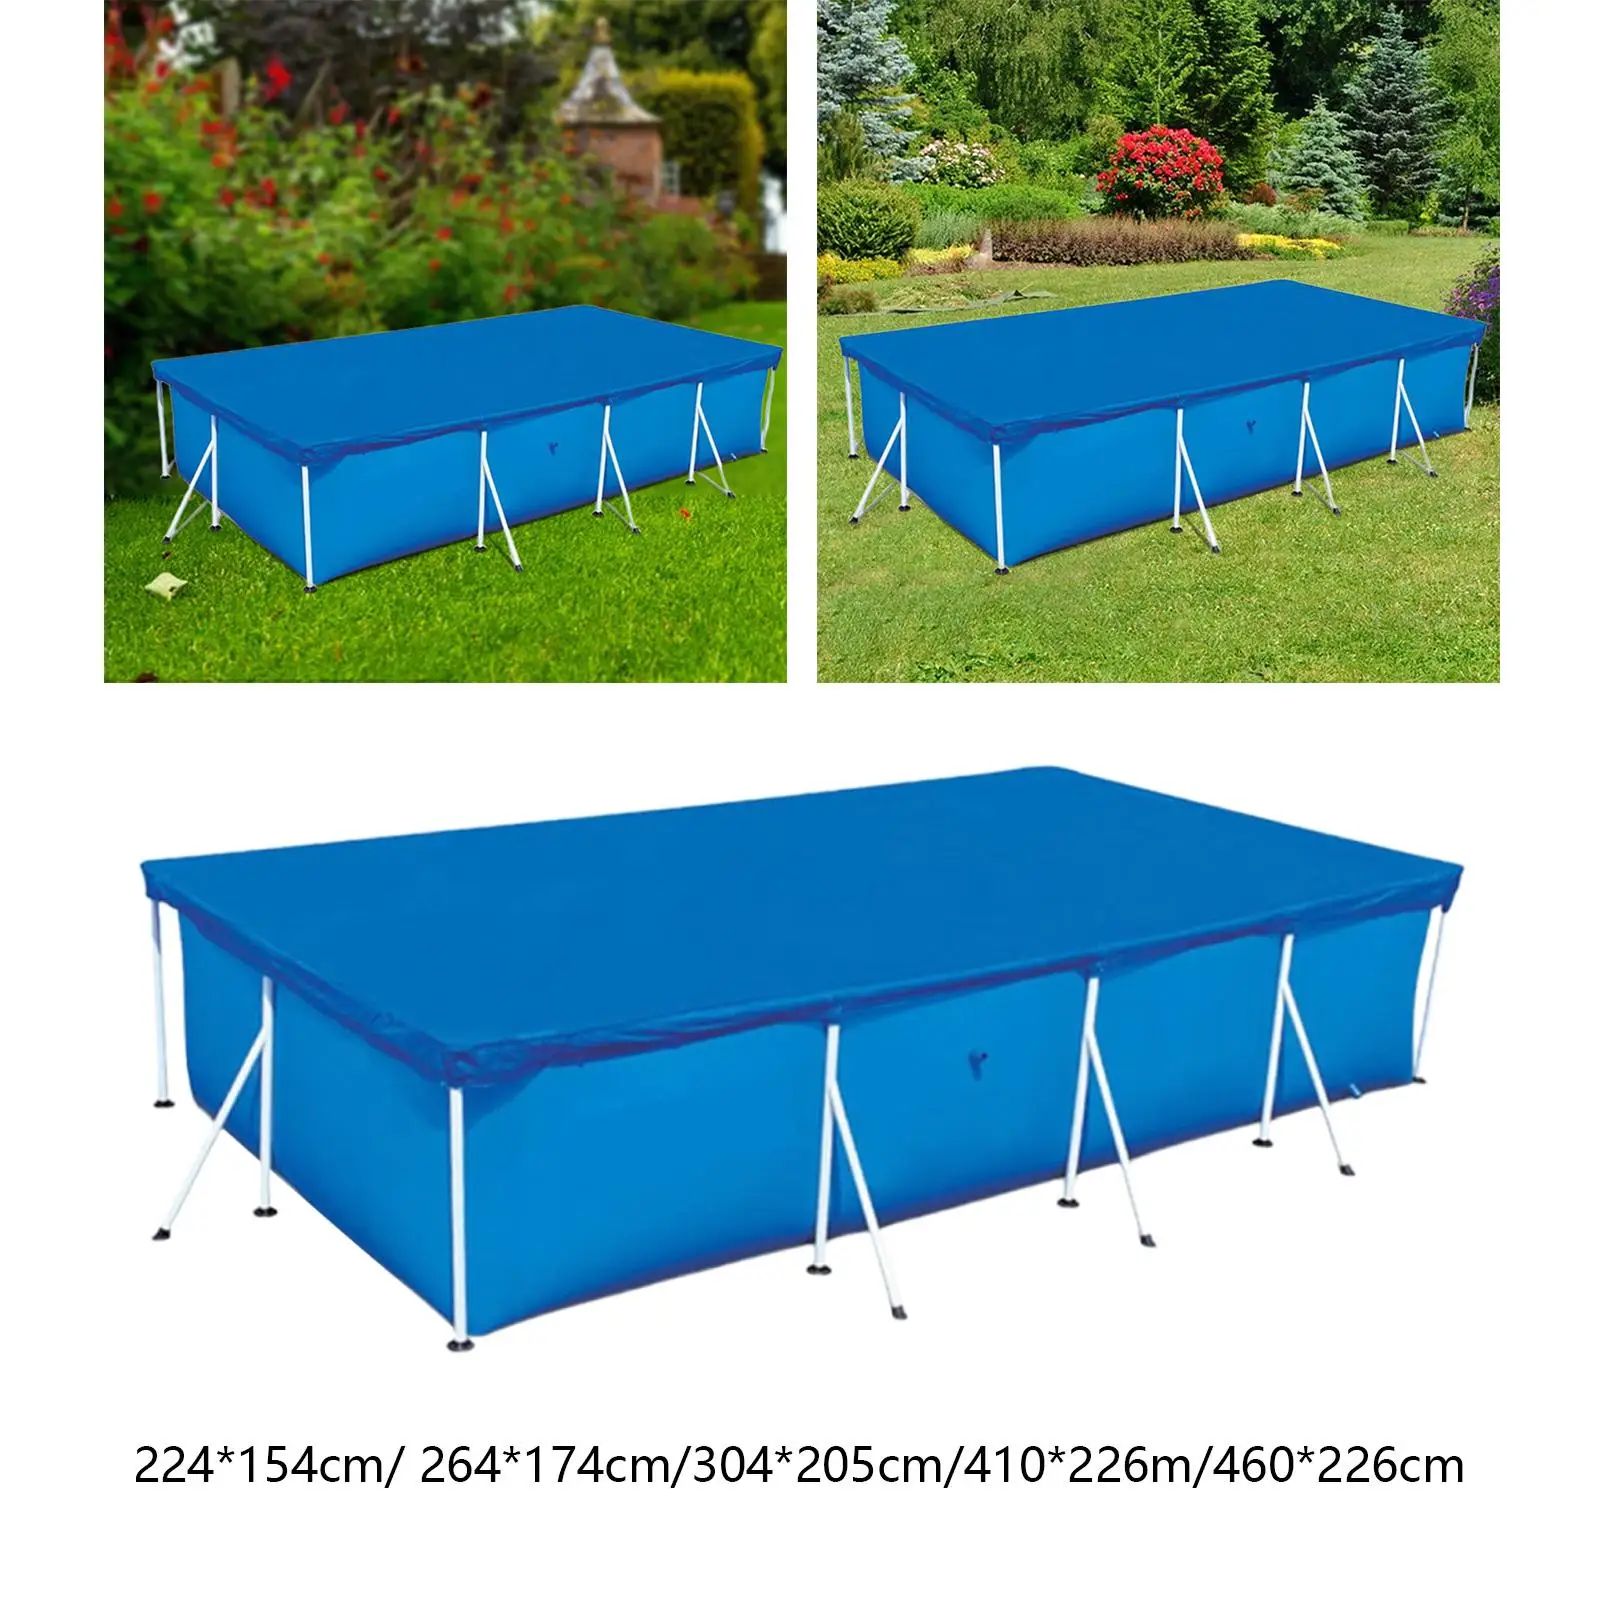 Rectangular Pool Cover Foldable Inflatable Pool Cover for Outdoor Paddling